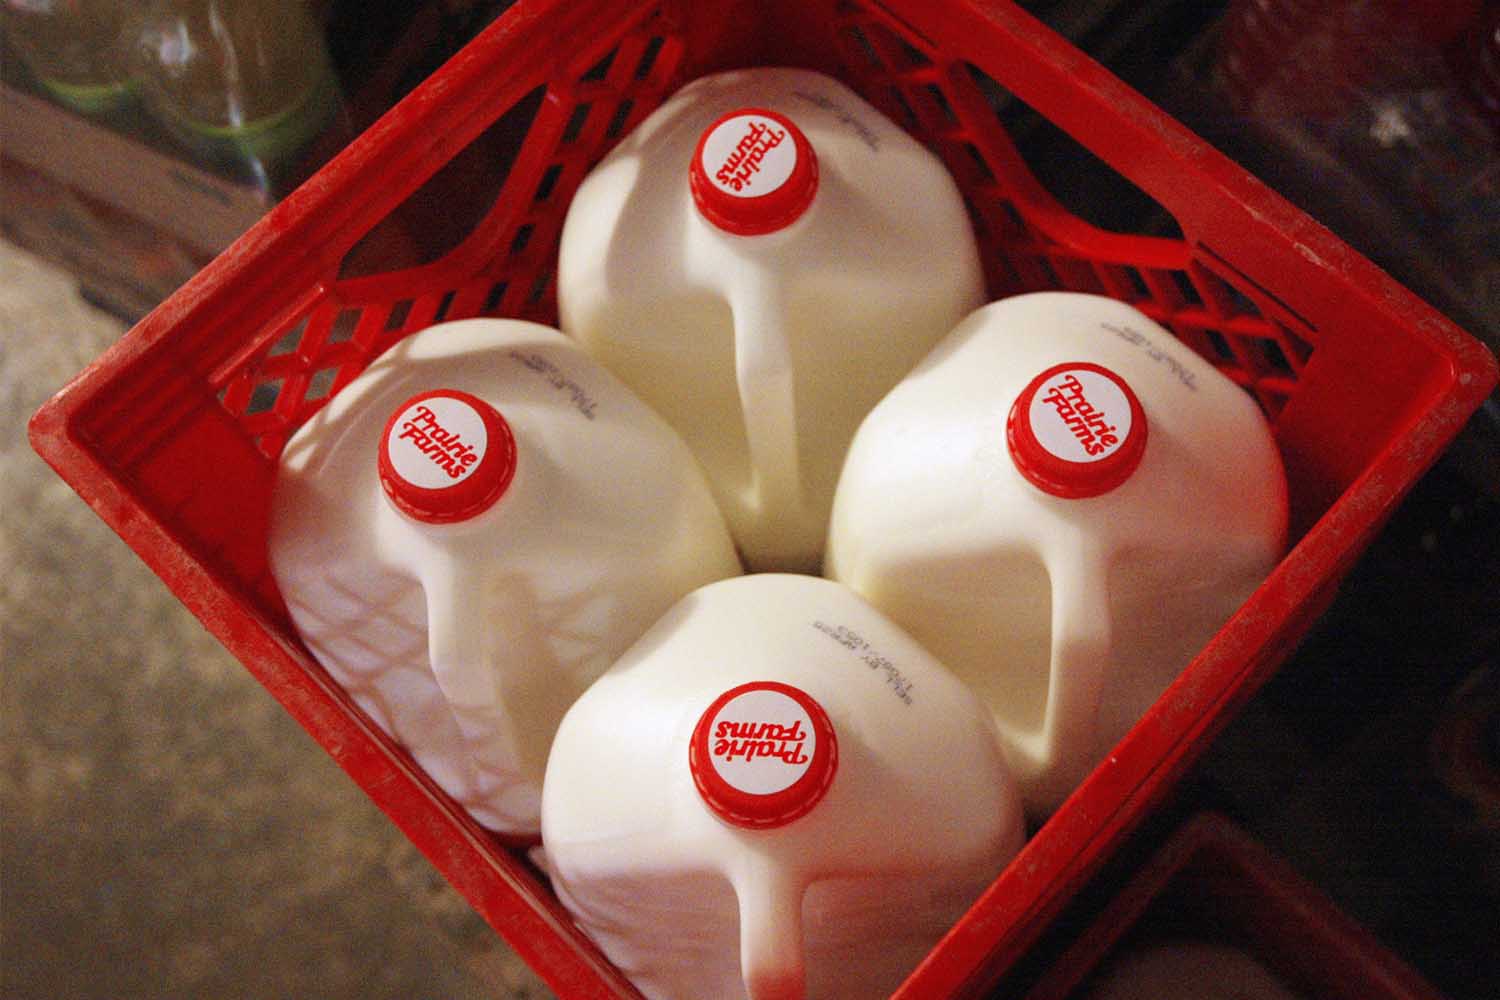 Containers of milk are seen in the cooler of a convenience store April 12, 2004 in Chicago, Illinois.